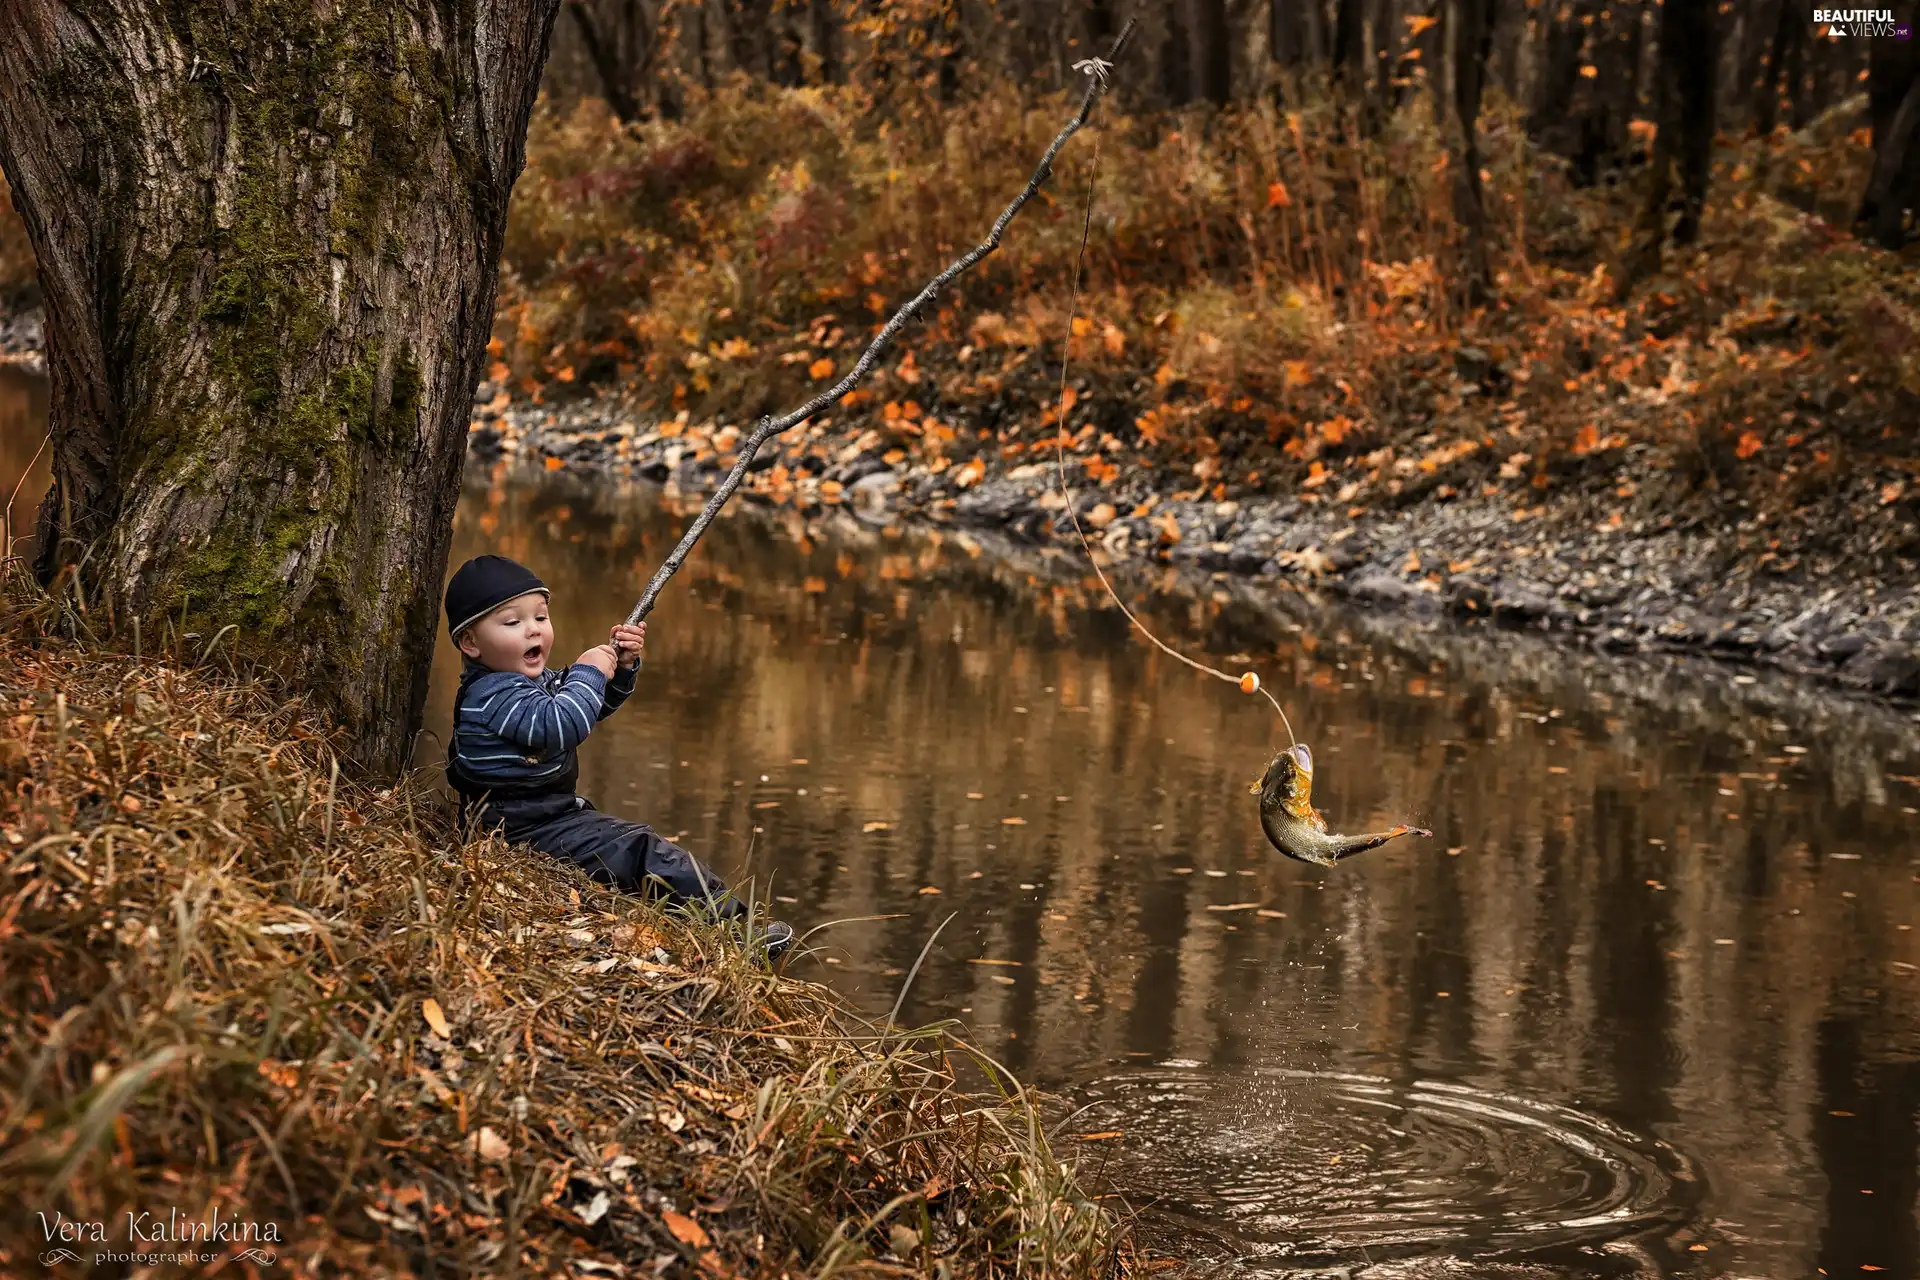 River, forest, fishing rod, fish, Kid